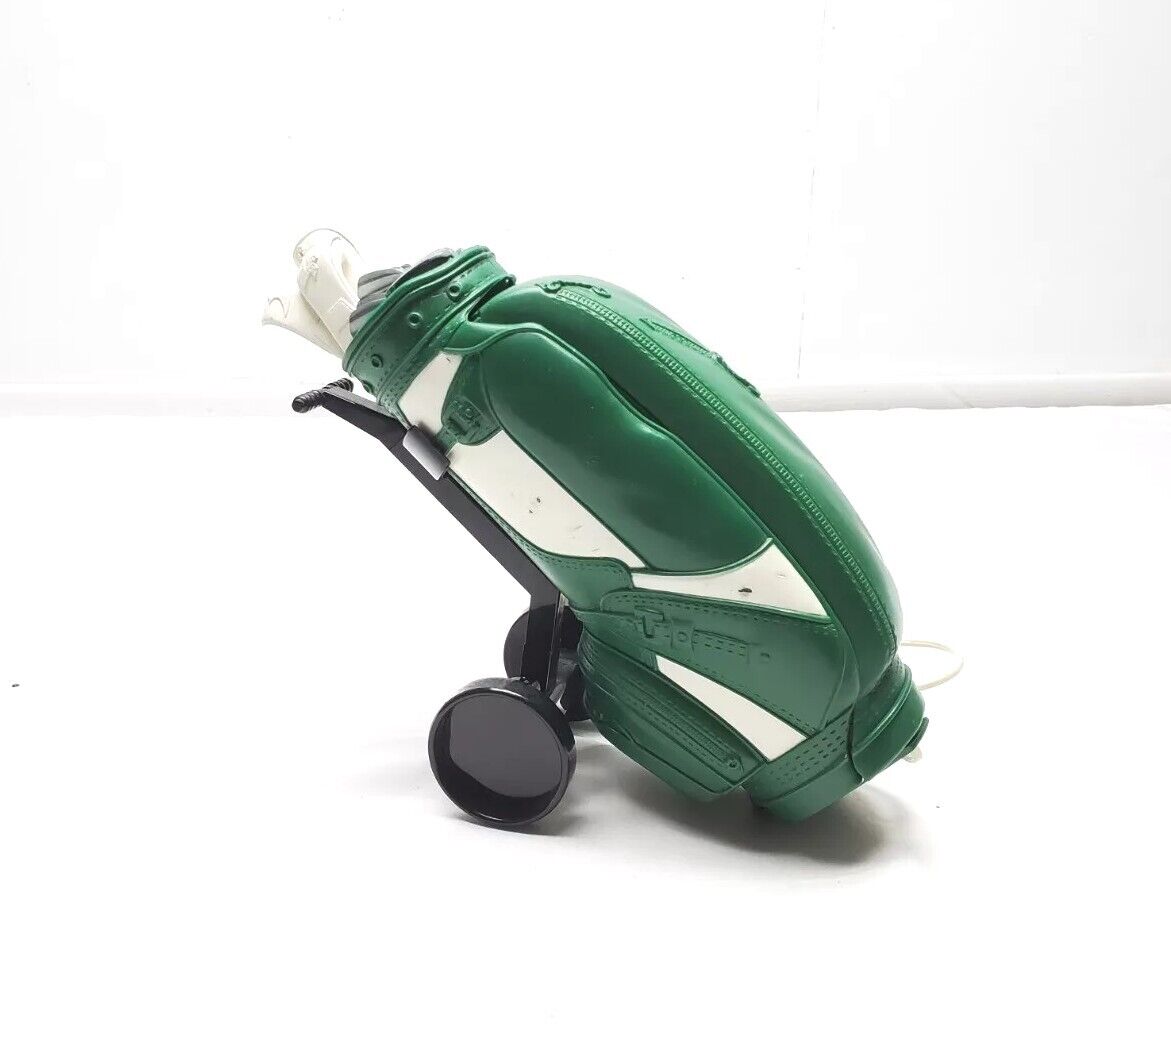 Vintage Green & White Golf Clubs Bag Corded Push-Button Telephone 1994